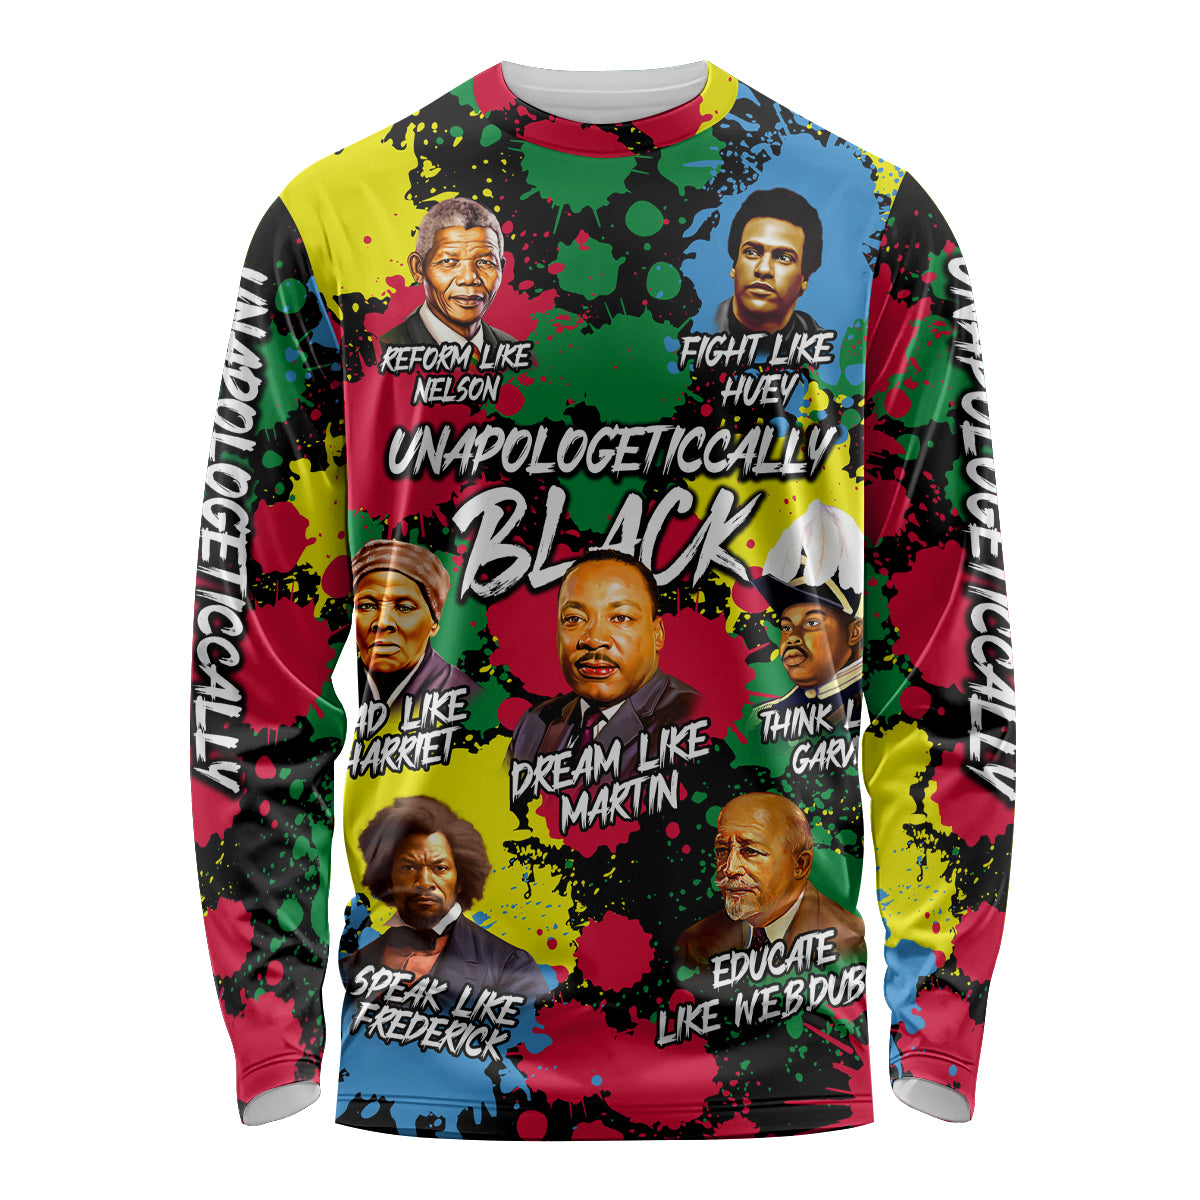 Unapologetically Black Long Sleeve Shirt Civil Rights Leaders